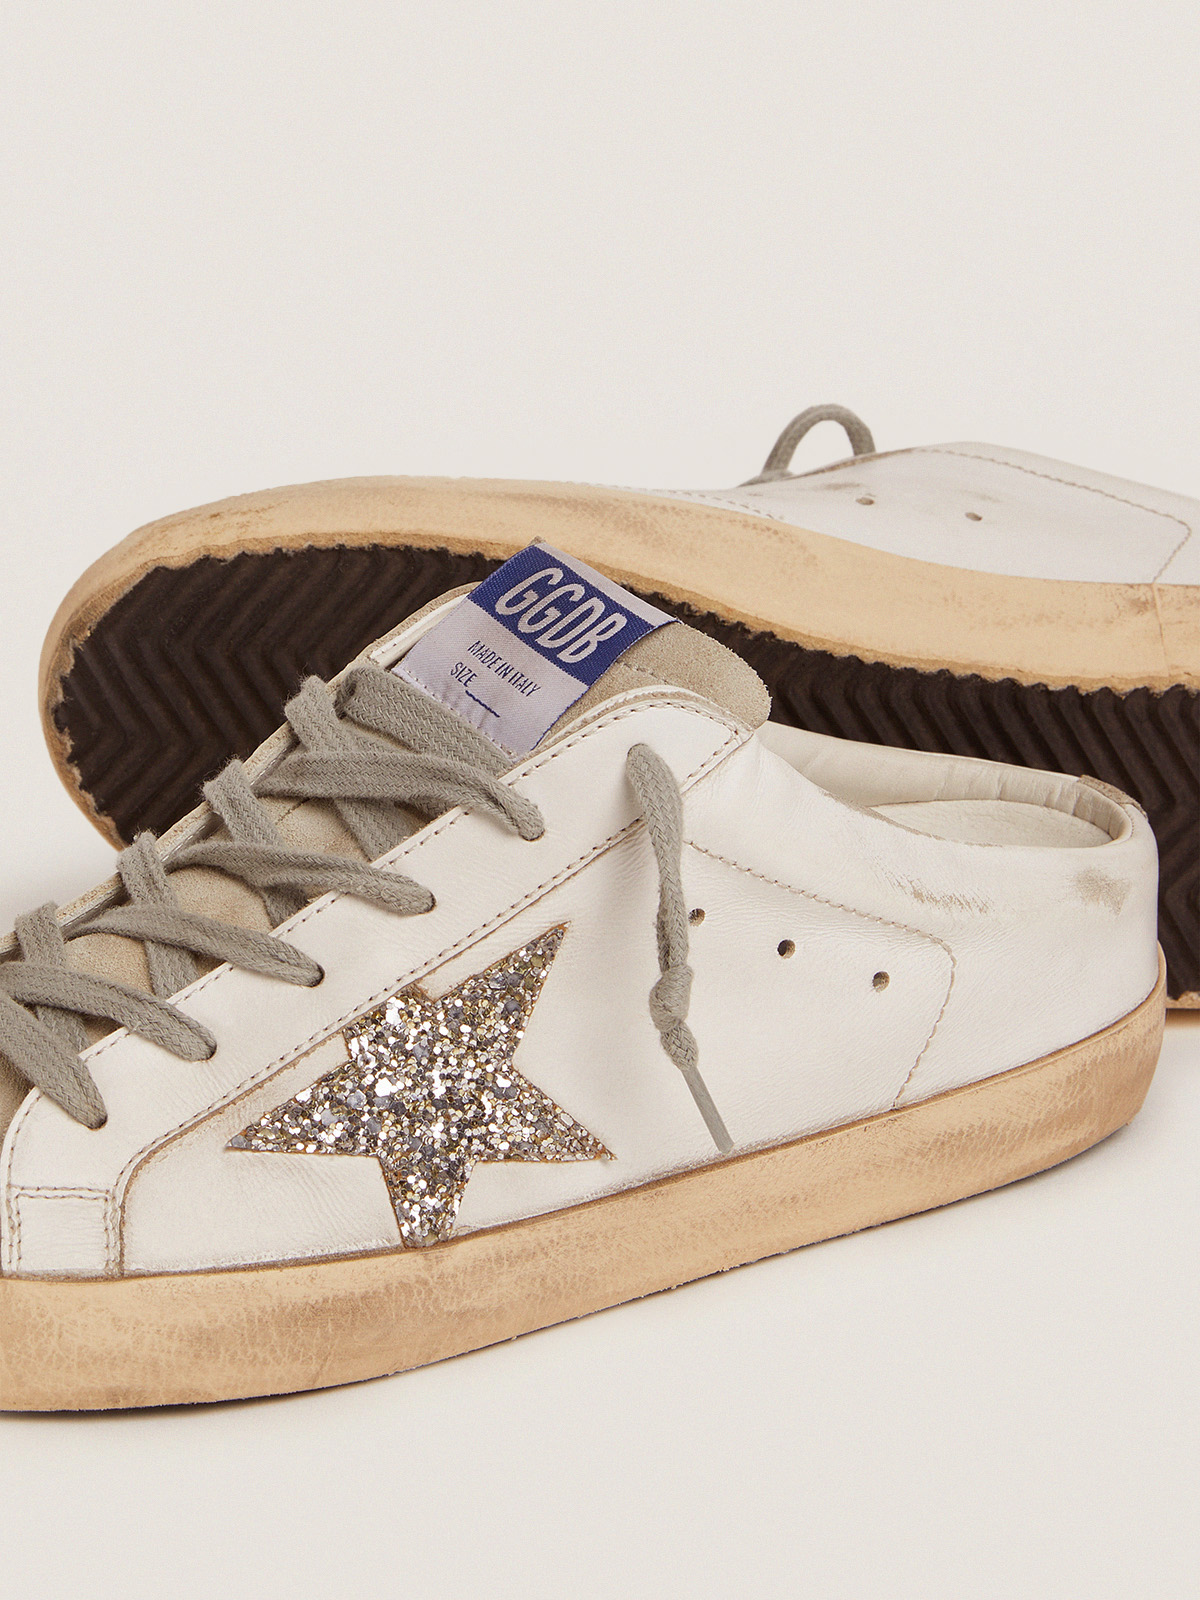 Super-Star Sabots in white leather and gray suede with silver glitter star  | Golden Goose